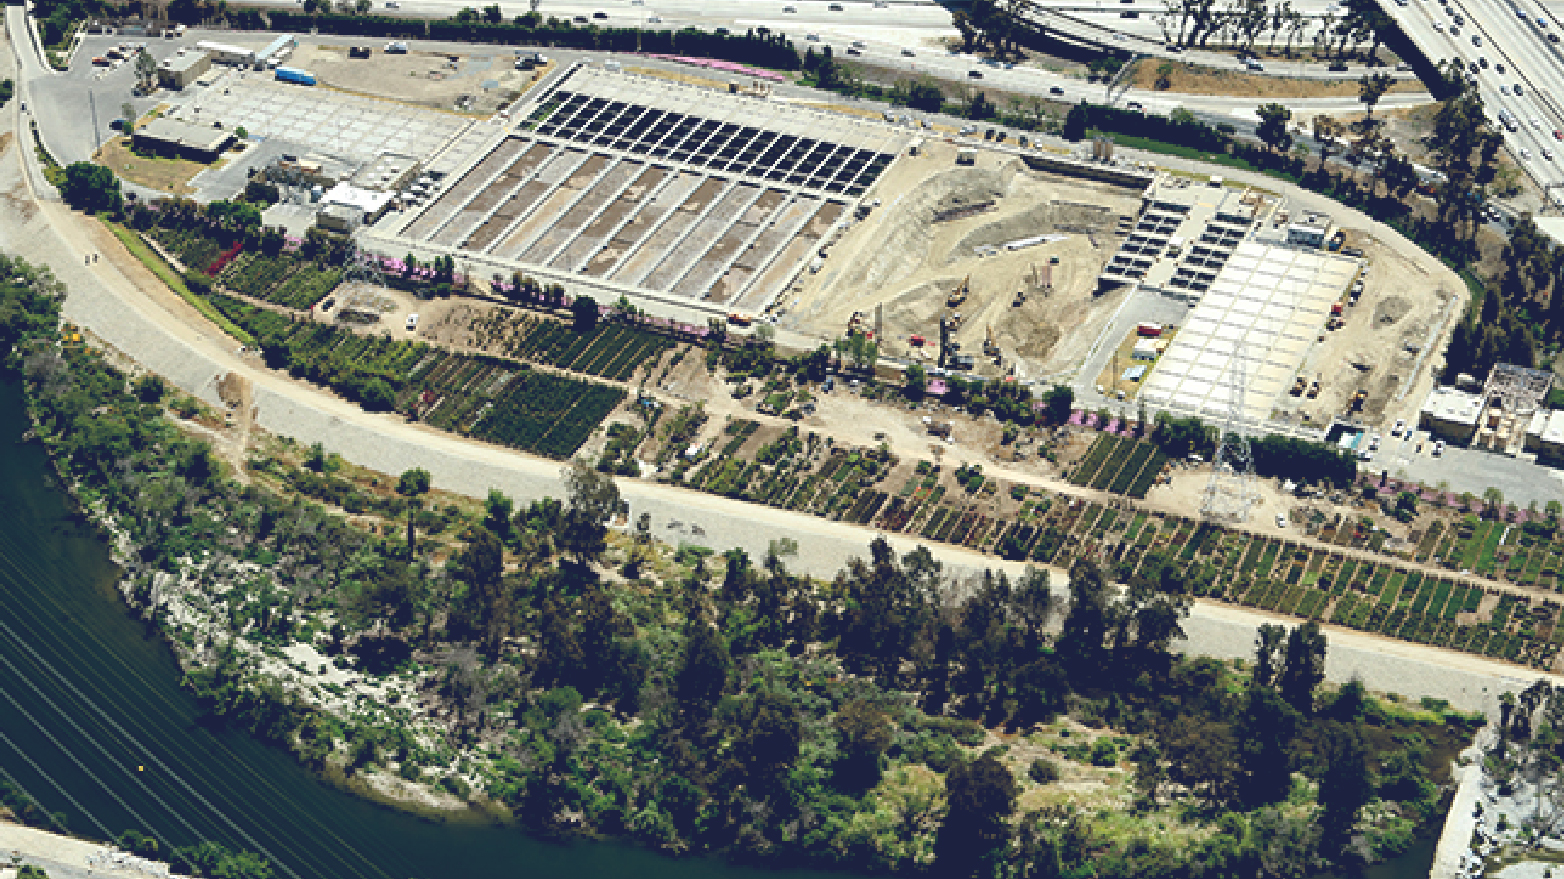 The Los Angeles County Sanitation Districts’ Whittier Narrows Water Reclamation